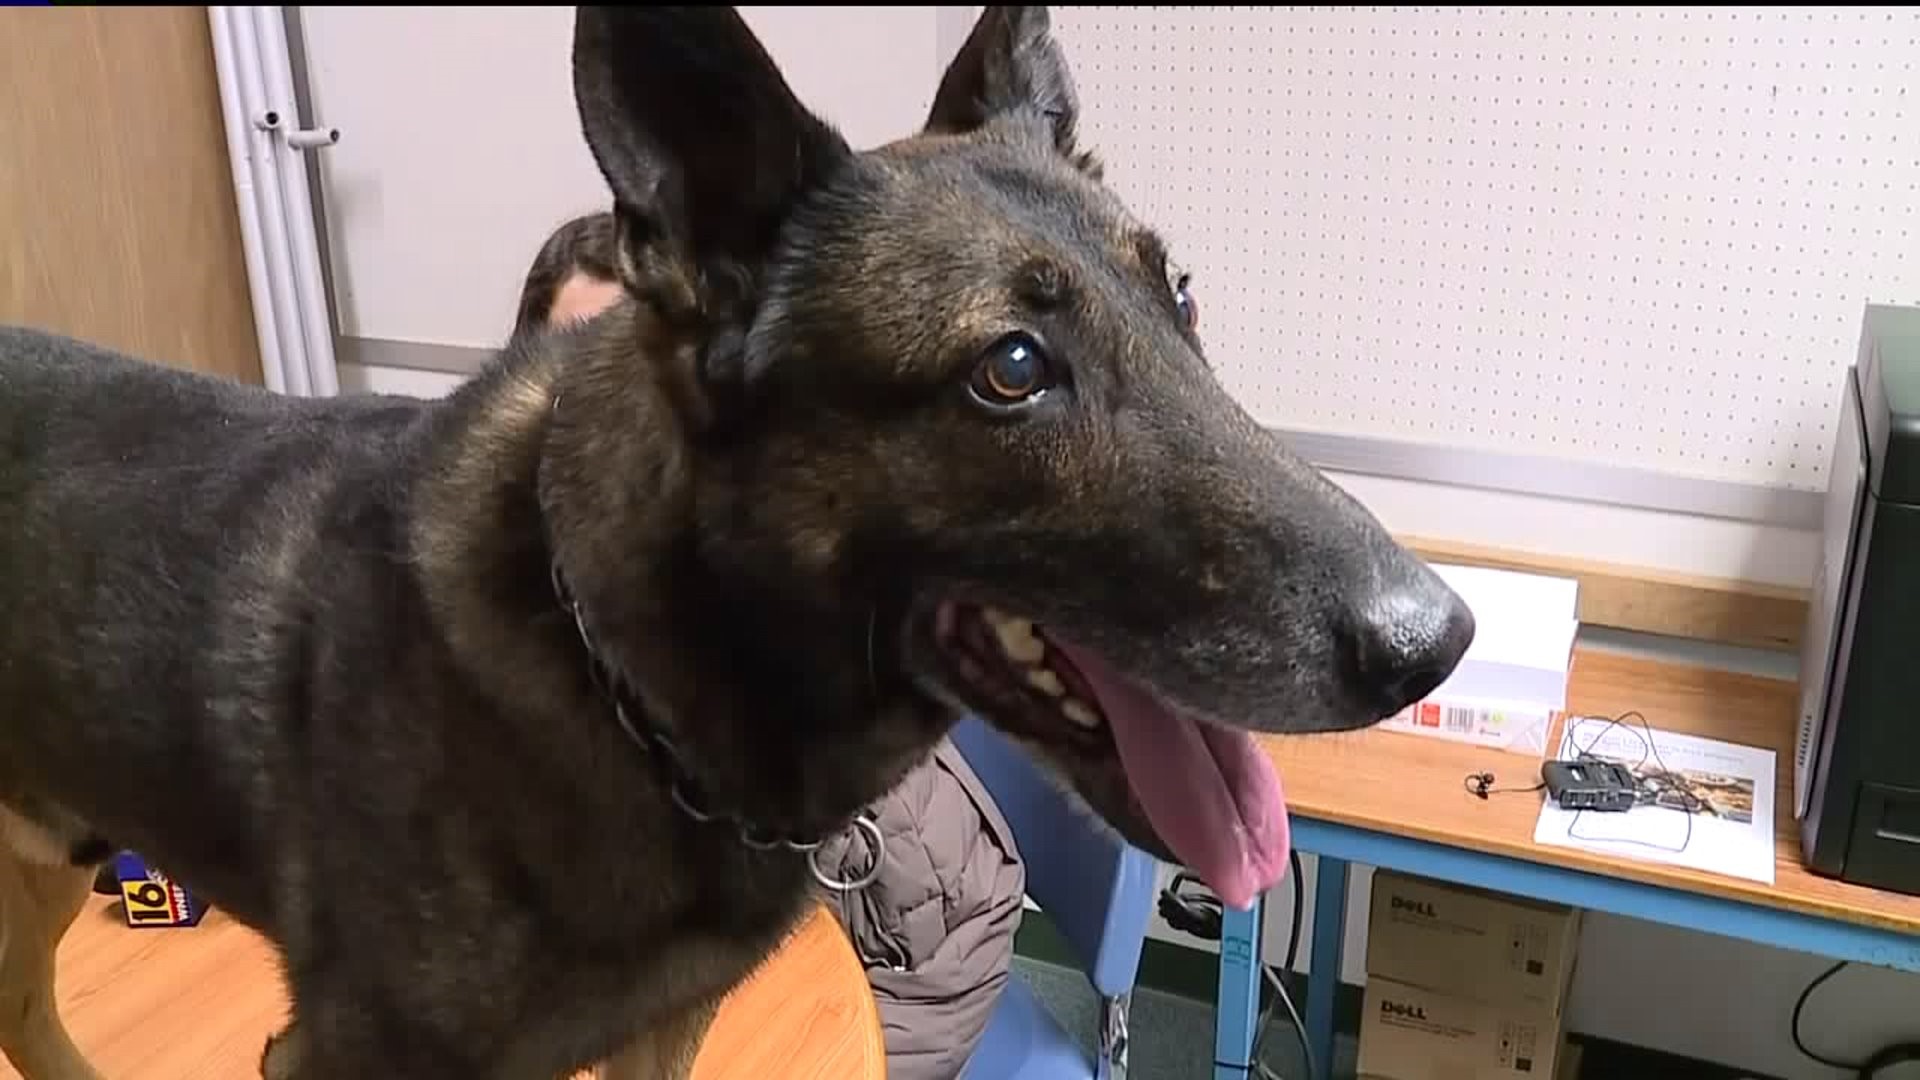 K-9 Retires from South Williamsport Police Department